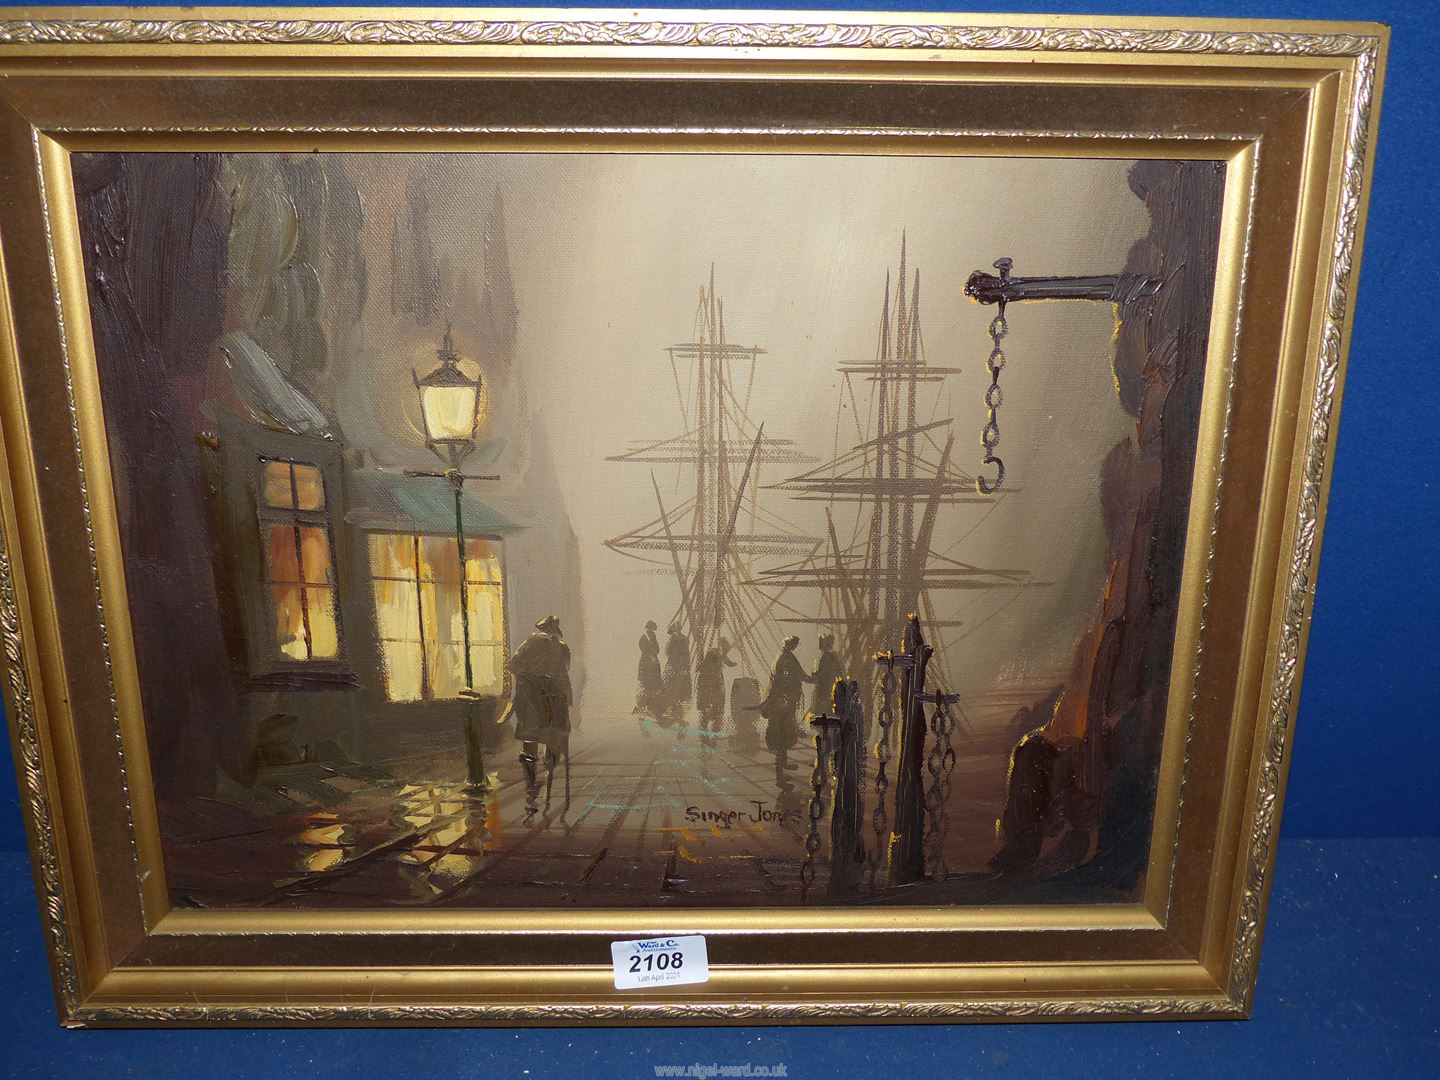 A framed Oil on canvas of a Victorian harbour scene at night, signed Singer Jones (Donald Hughes),